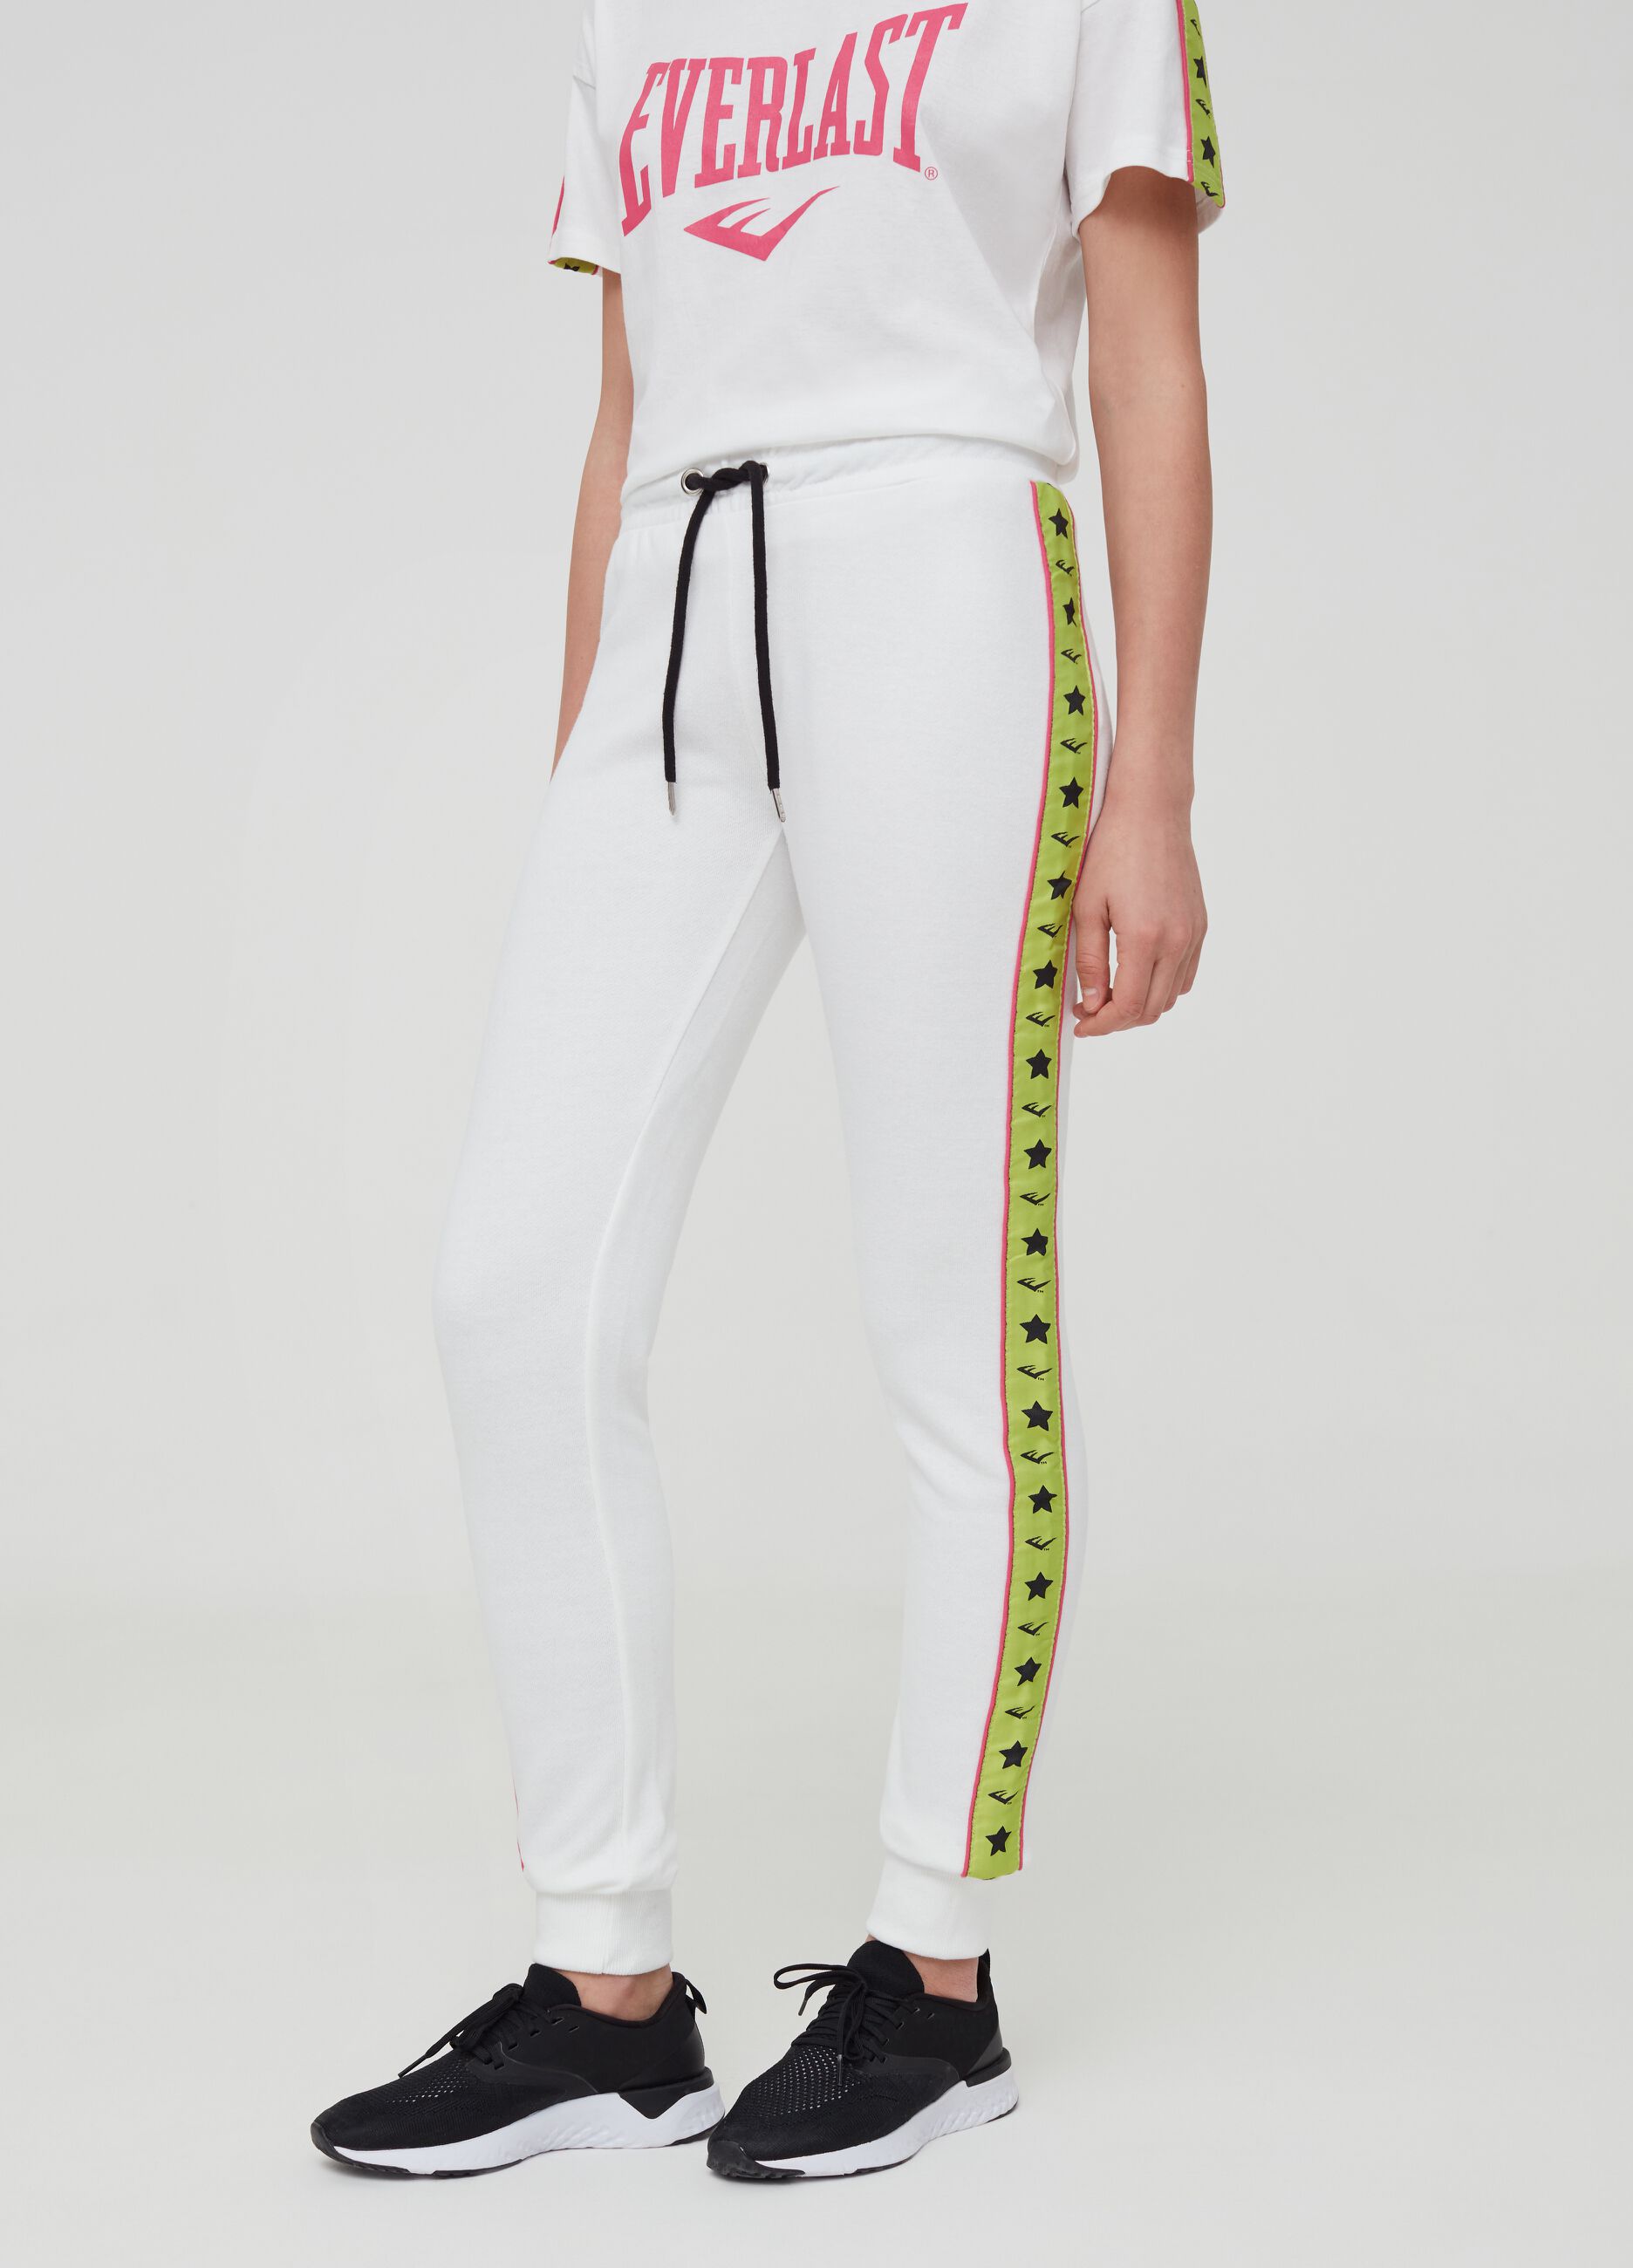 Jogger trousers with Everlast print